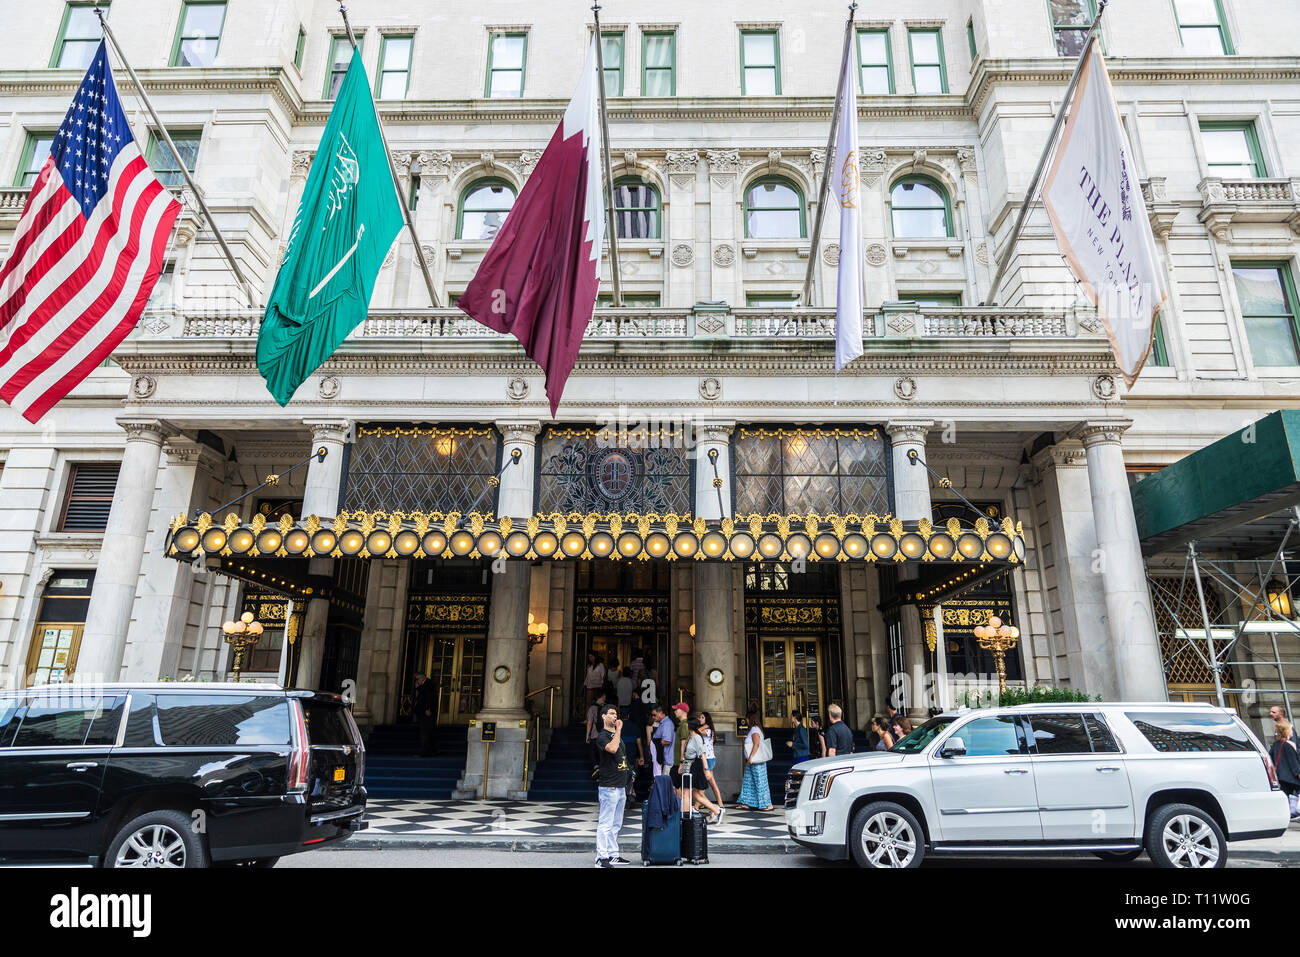 New York City, USA - July 28, 2018: Entrance of the Plaza Hotel, a luxury hotel and condominium apartment building in the Midtown Manhattan next to Ce Stock Photo